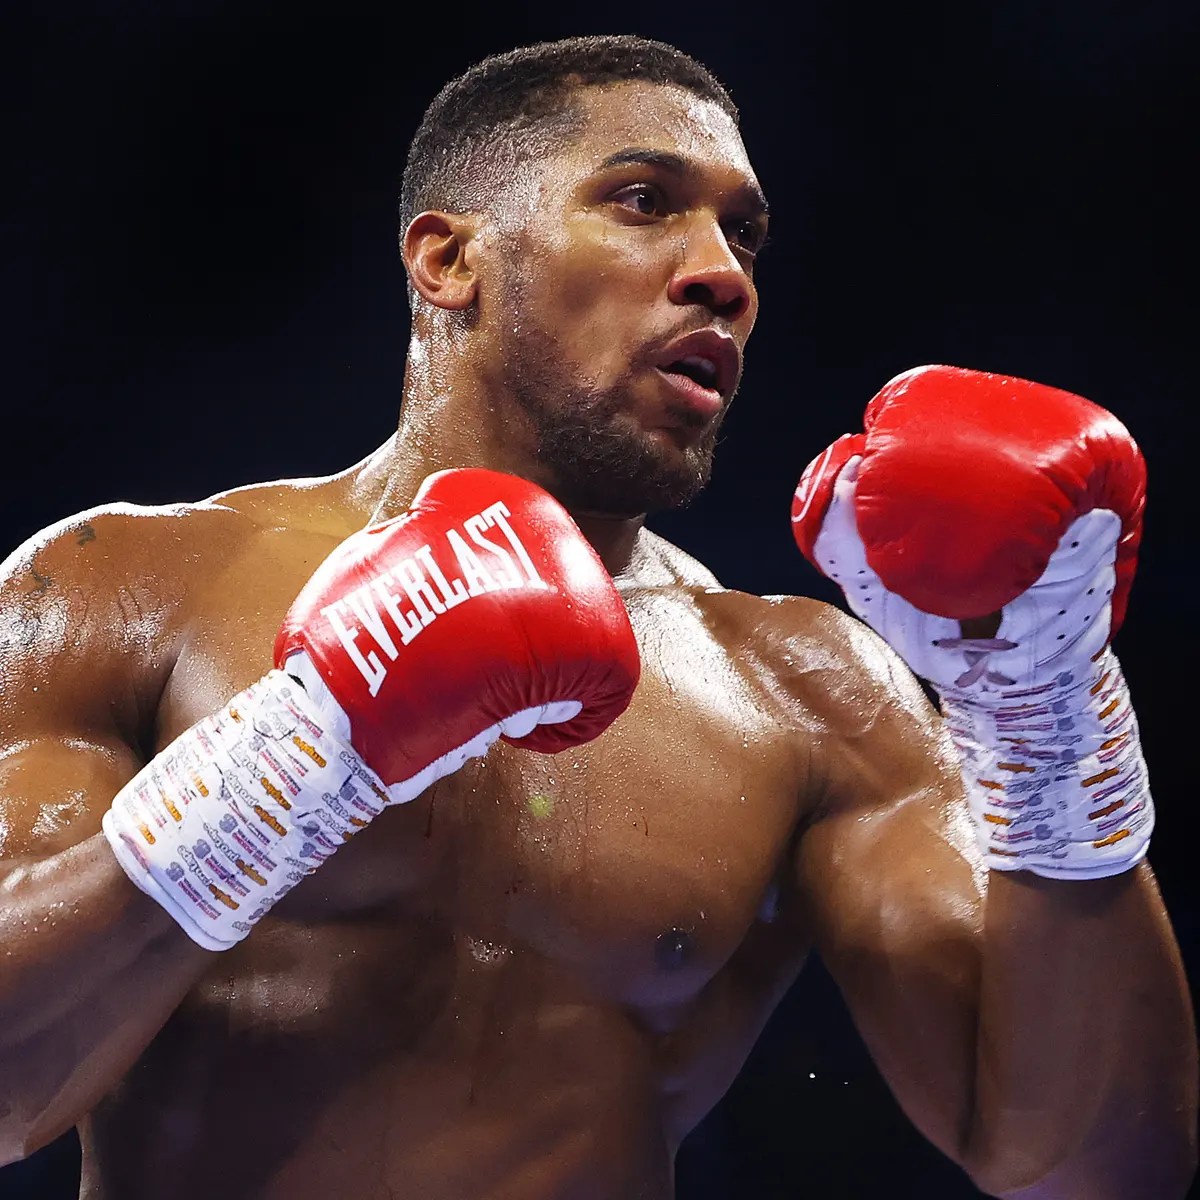 
Anthony Joshua vs Agit Kabayel Heavyweight Boxing Clash Is Potentially Set for August 12, Fans React-"Circus Show"